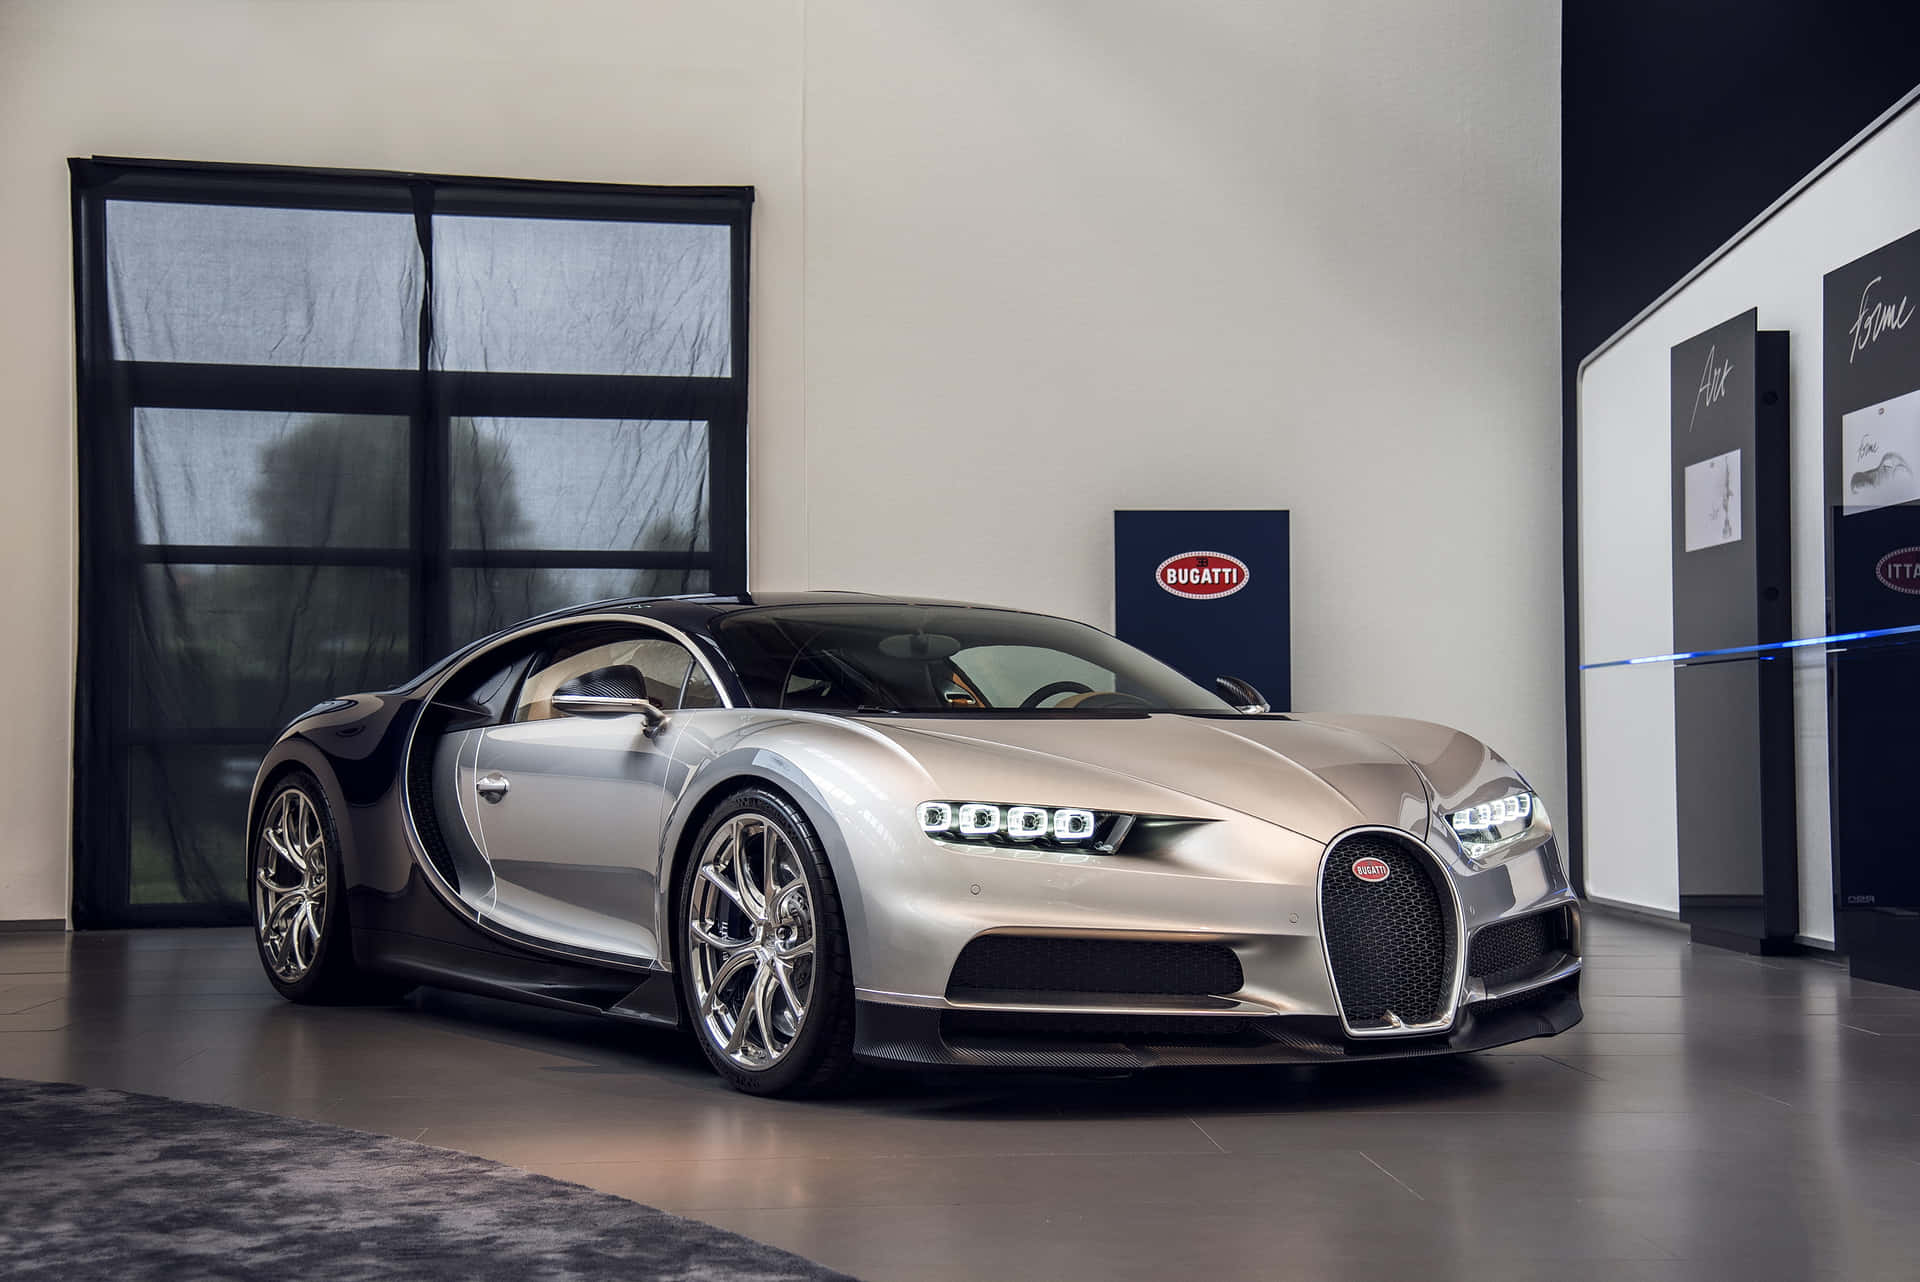 A stunning Bugatti Chiron unleashed on the open road Wallpaper